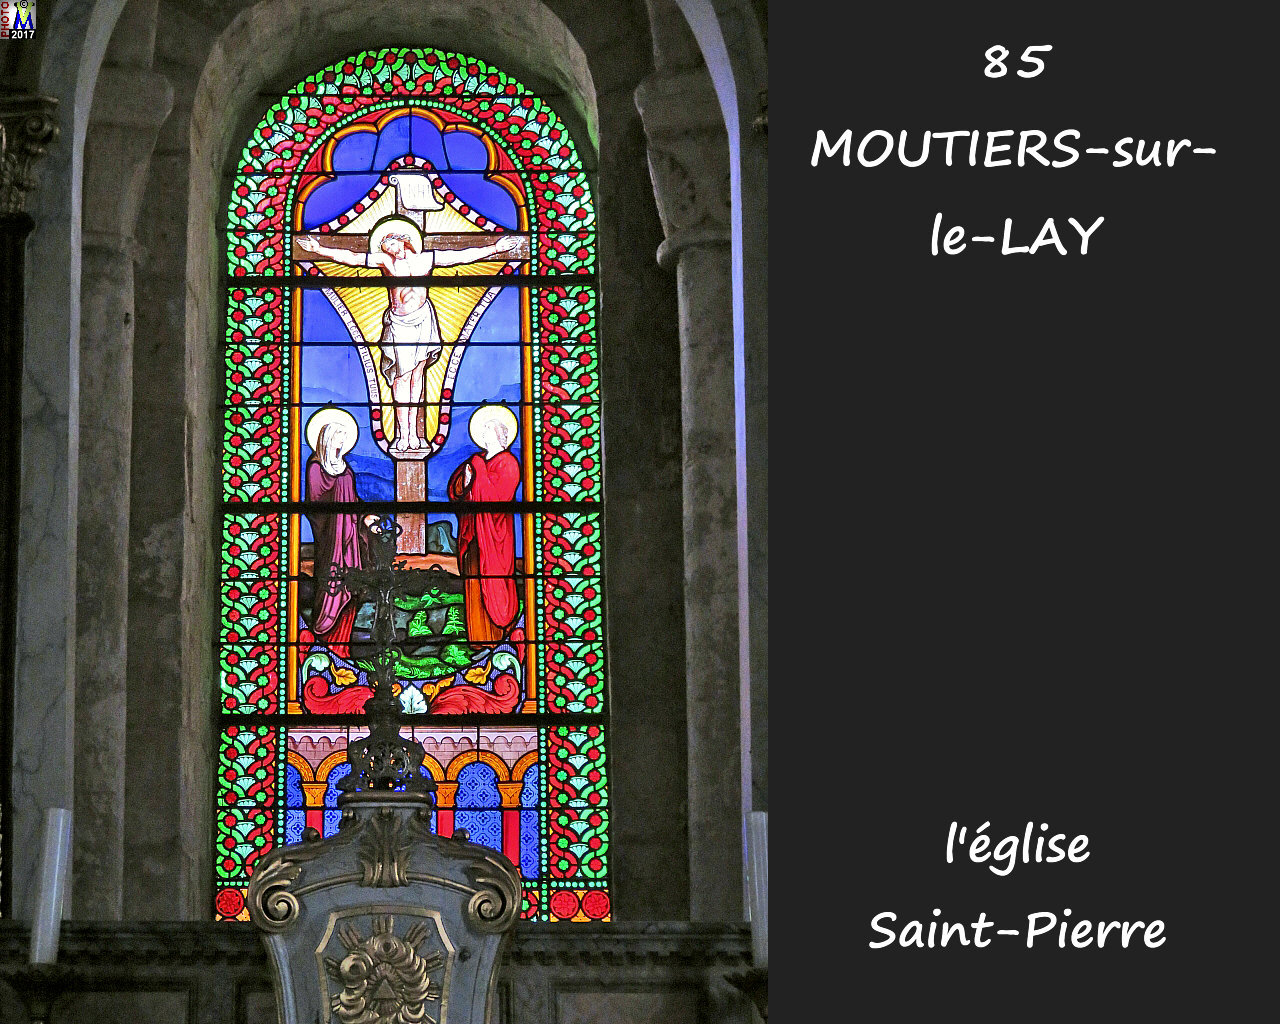 85MOUTIERS-LAY_eglise_1260.jpg